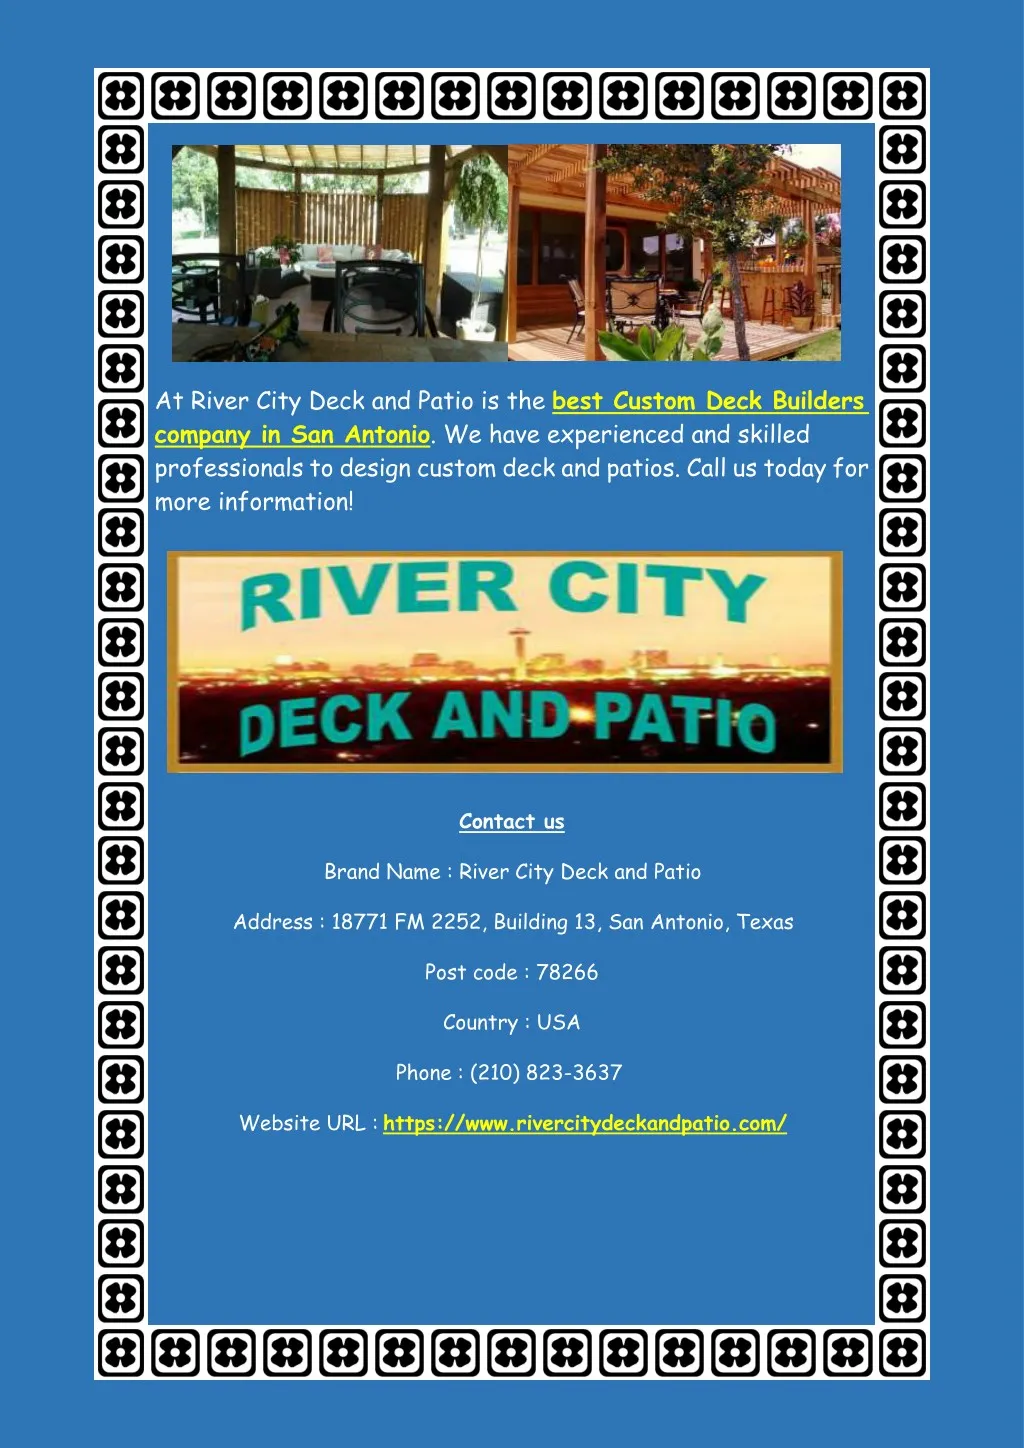 at river city deck and patio is the best custom